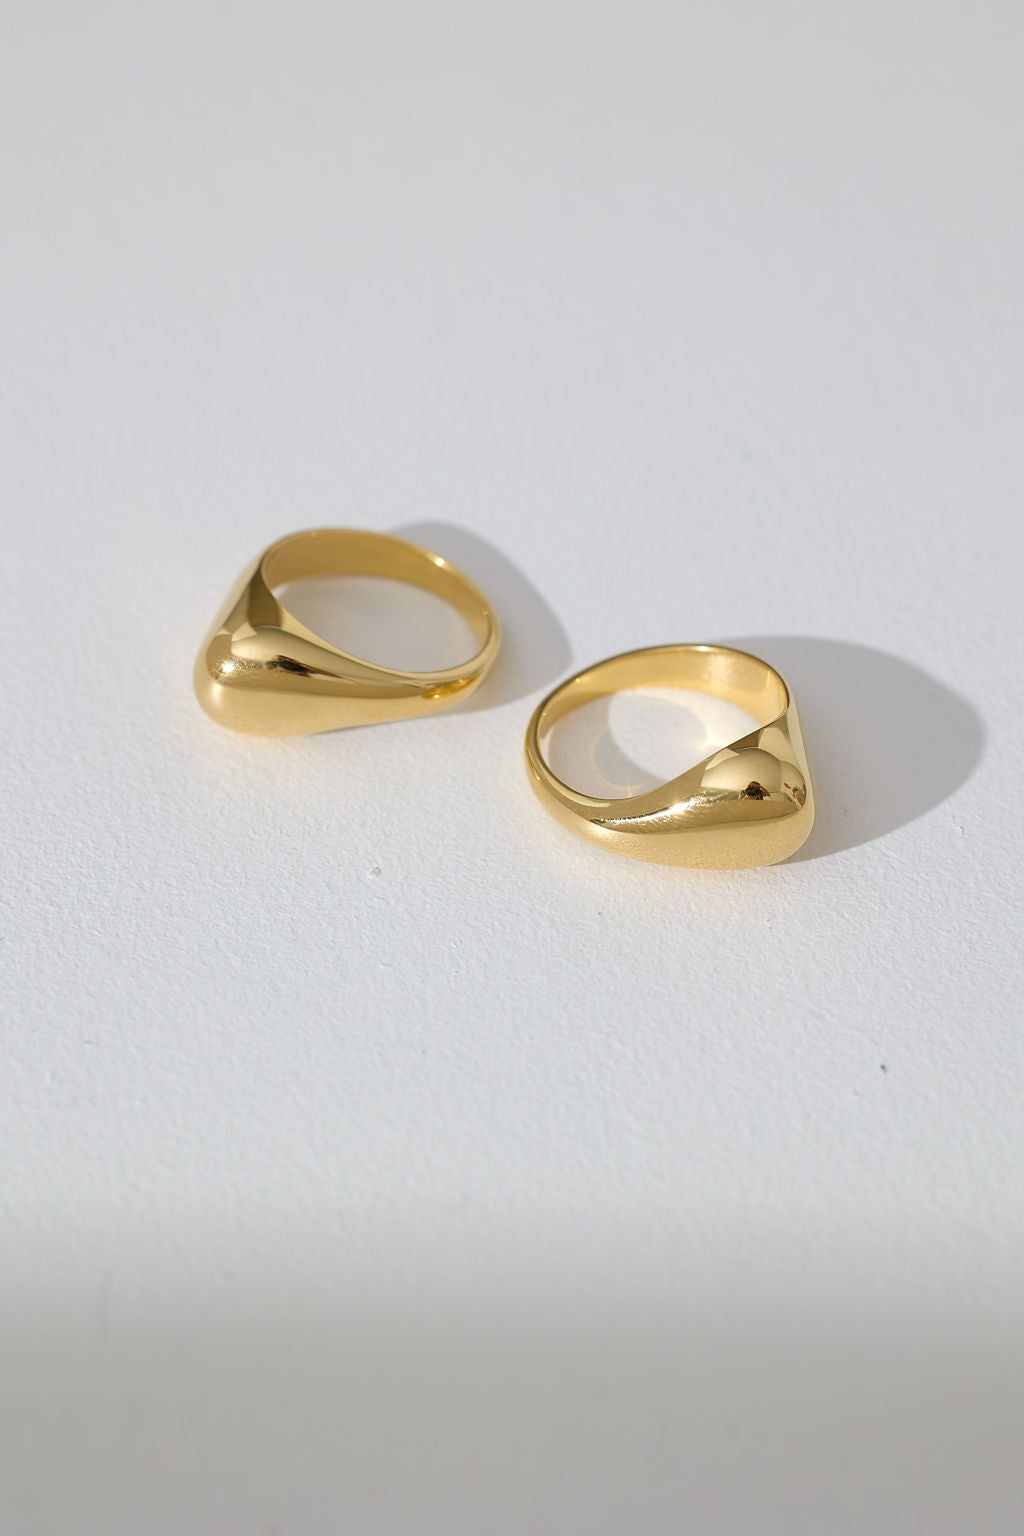 Tear Drop stacked rings